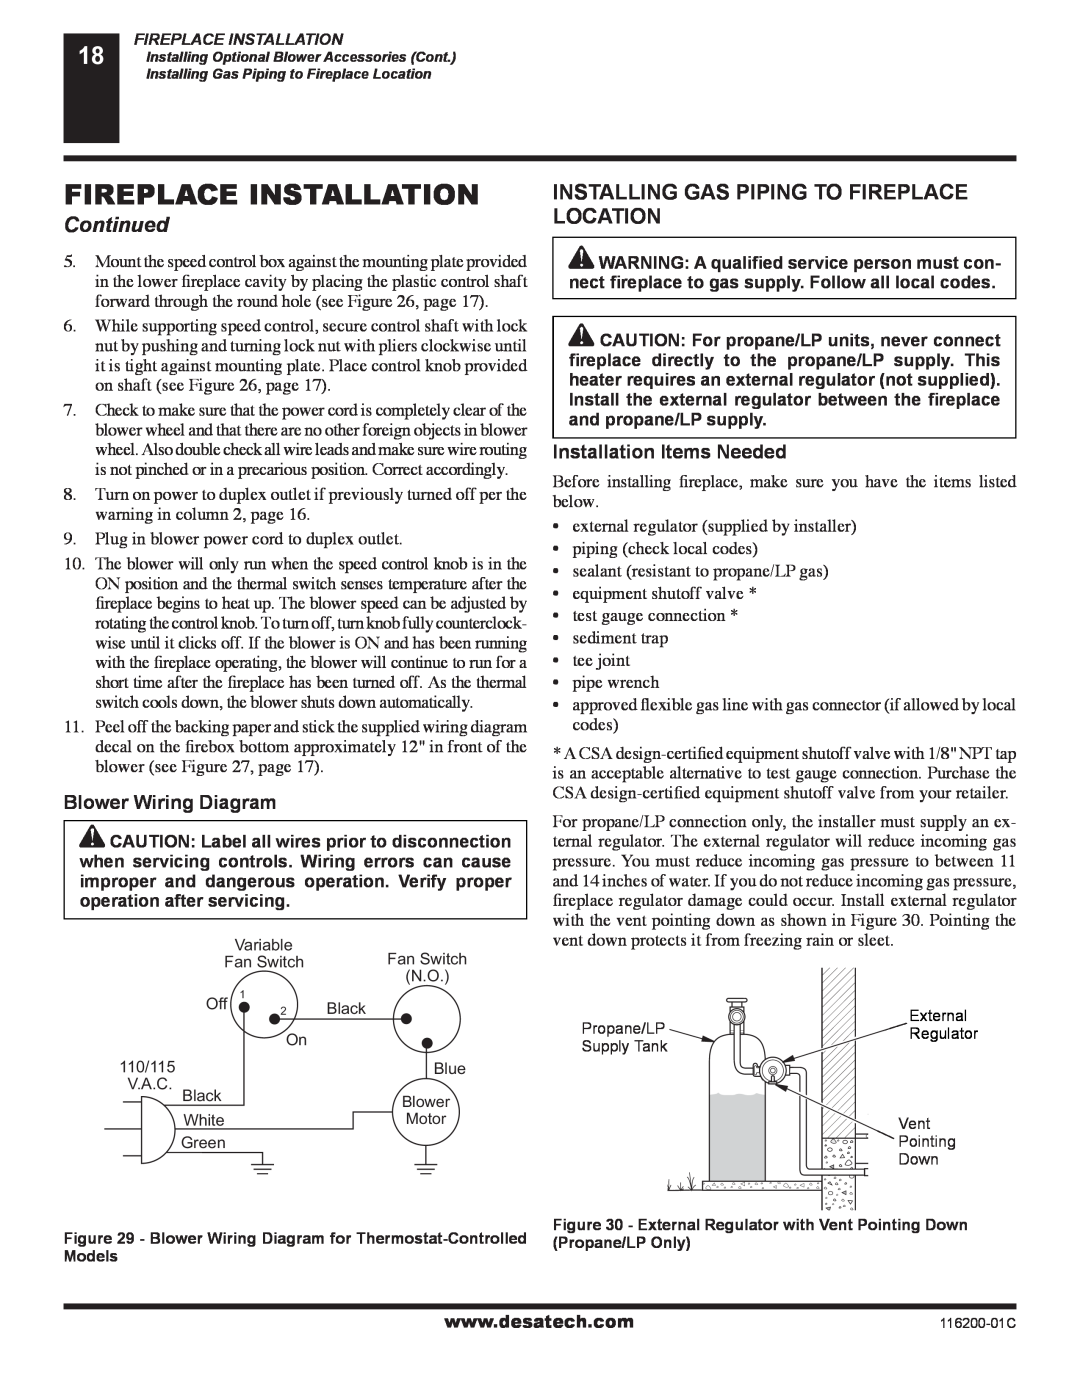 Desa CGCDV36NR Installing Gas Piping To Fireplace Location, Blower Wiring Diagram, Installation Items Needed, Continued 